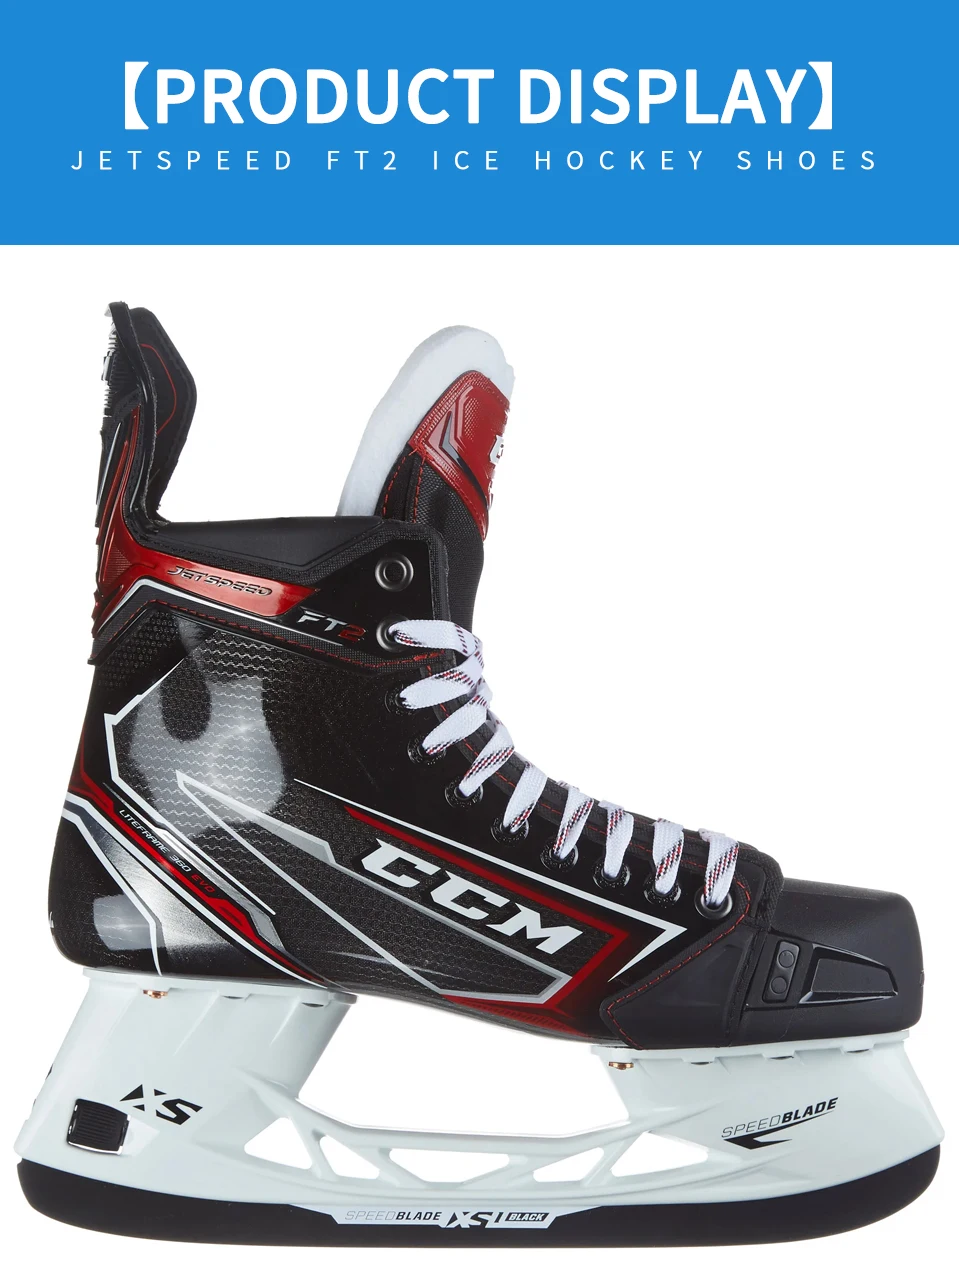 eend Loodgieter Nationaal volkslied CCM Jetspeed FT2 Ice Hockey Shoes hockey training hockey game puck patines  profesionales roller skates Adult Child Ice Skates|Skate Shoes| - AliExpress